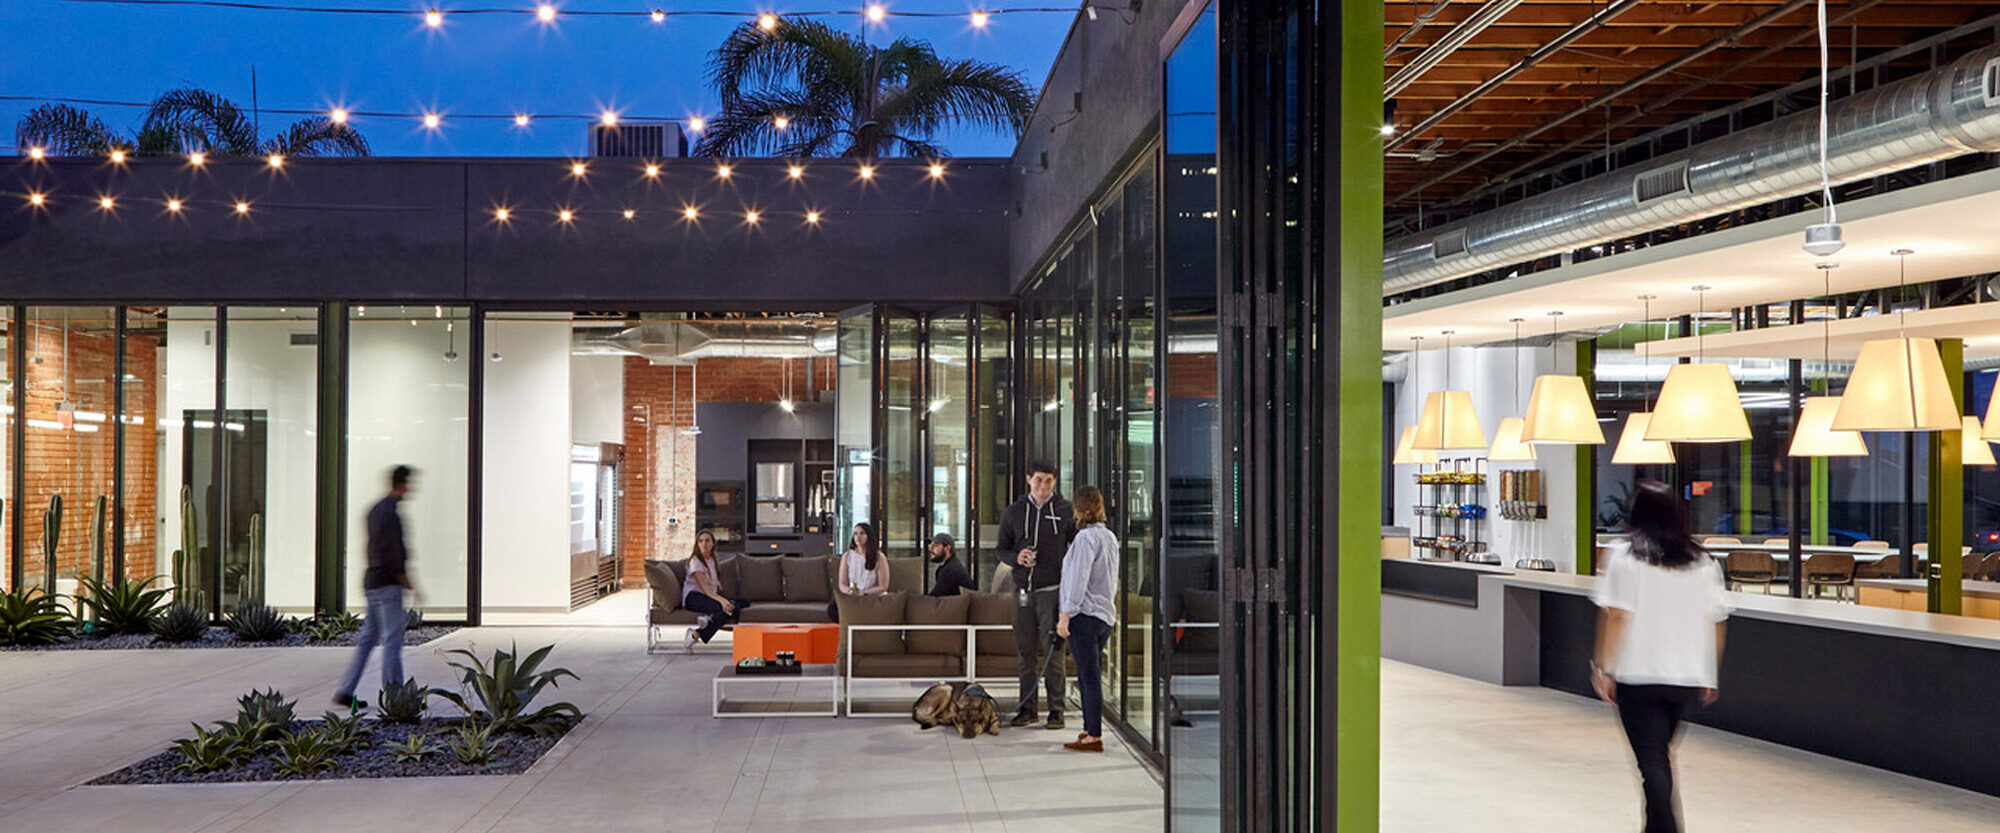 Open-plan office space seamlessly integrating indoor and outdoor areas with retractable glass walls, exposed ceiling beams, and pendant lighting. The design incorporates a modern industrial look with green plants adding a touch of nature.